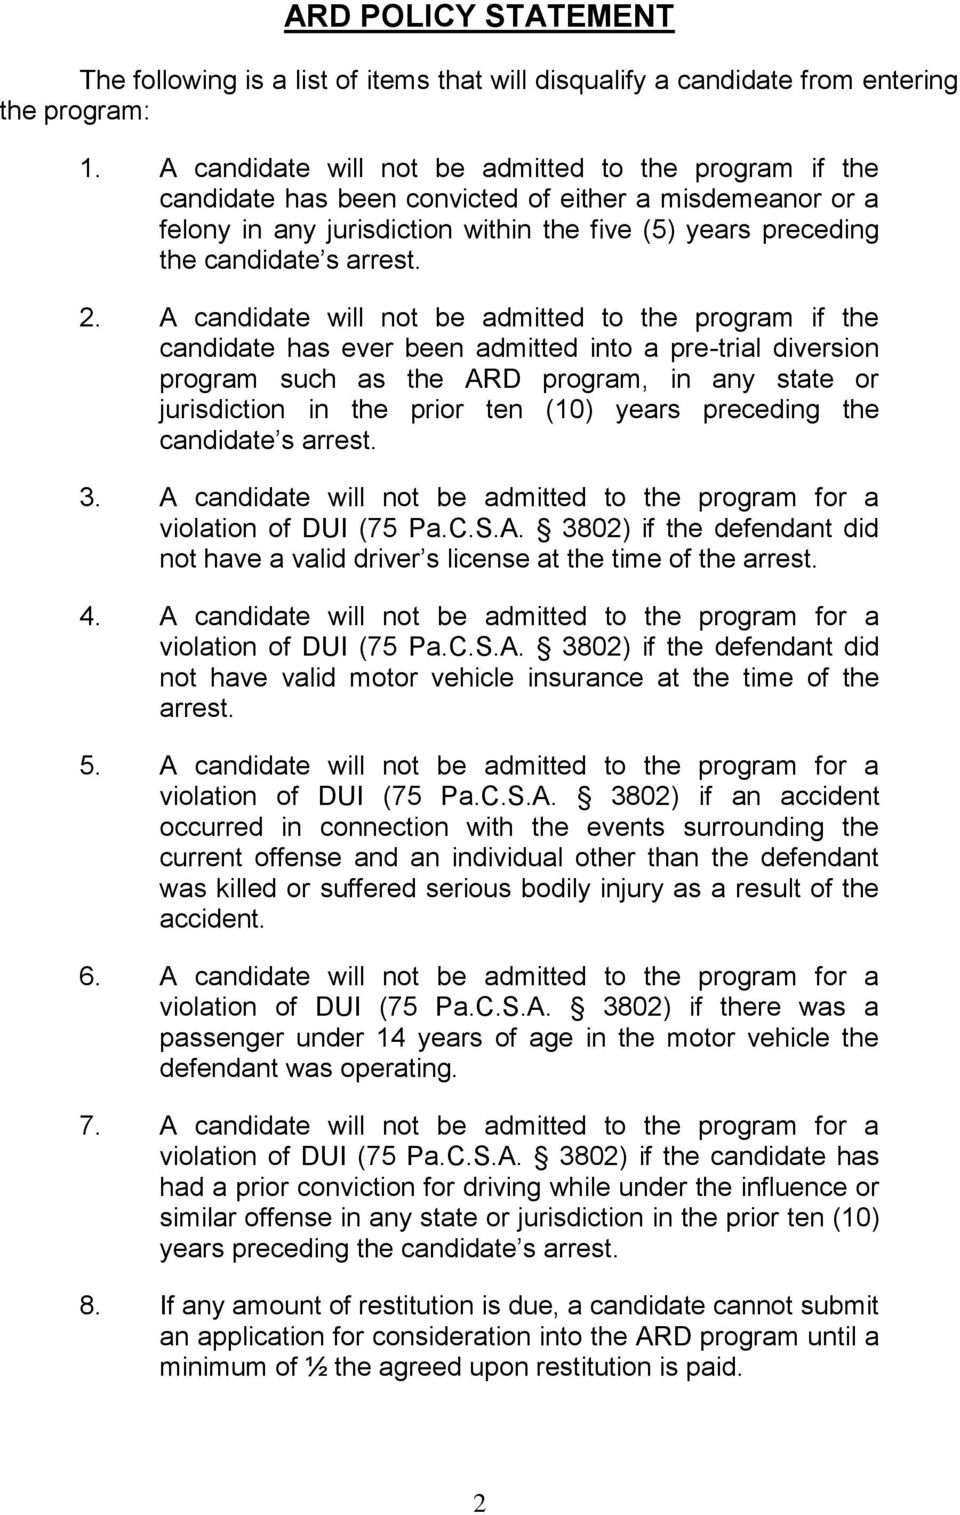 2. A candidate will not be admitted to the program if the candidate has ever been admitted into a pre-trial diversion program such as the ARD program, in any state or jurisdiction in the prior ten